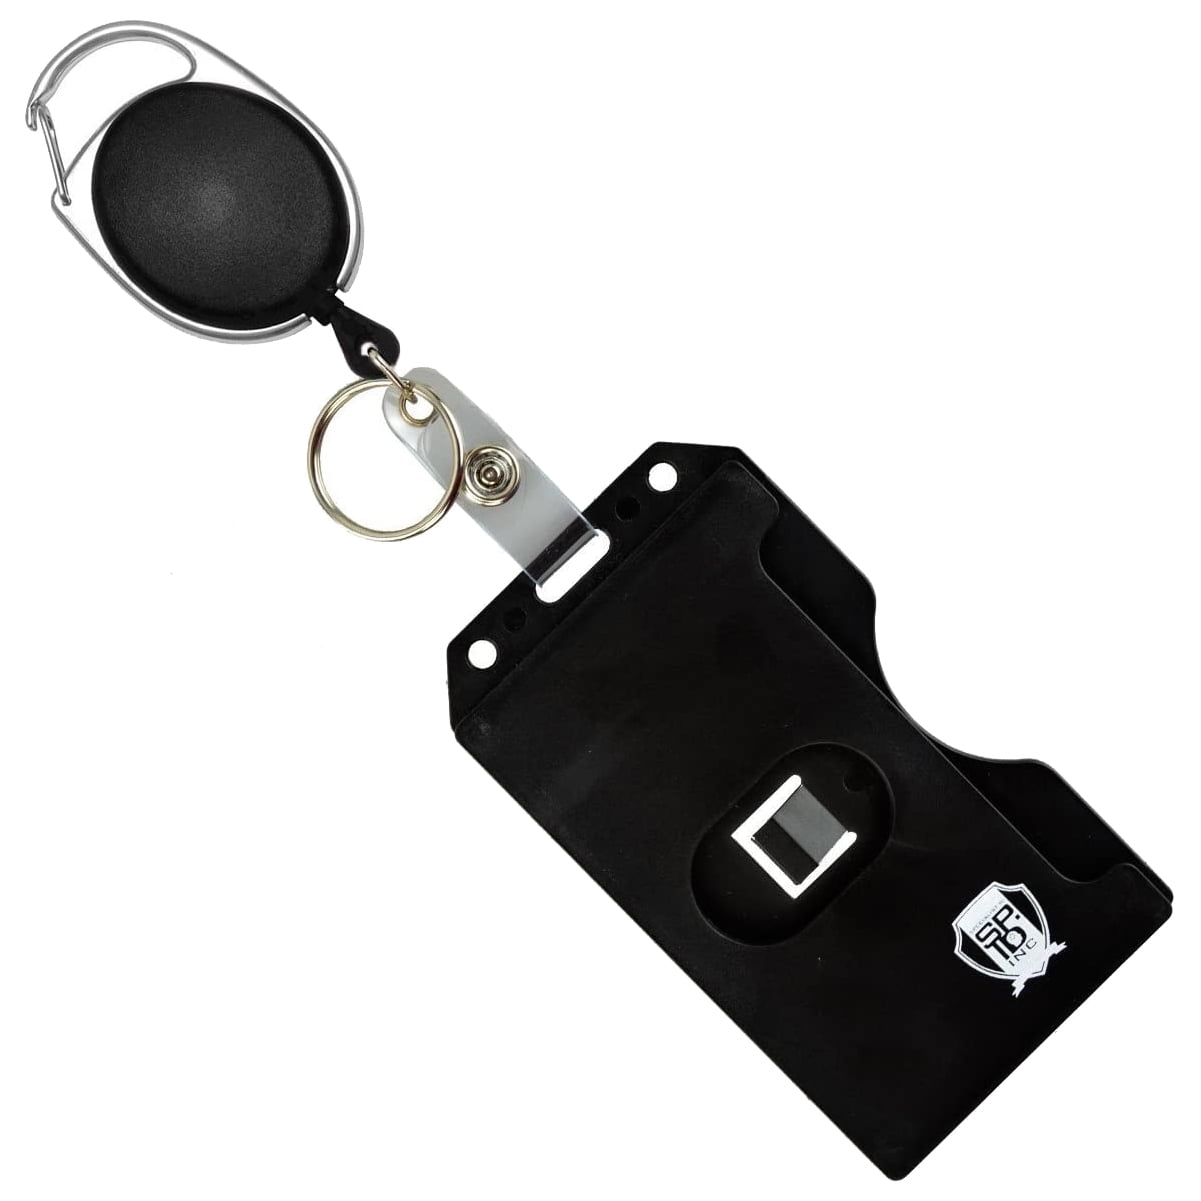 BE-HOLD ID card holder made of hard plastic for 1 to 2 cards and ID Yo-Yo with 